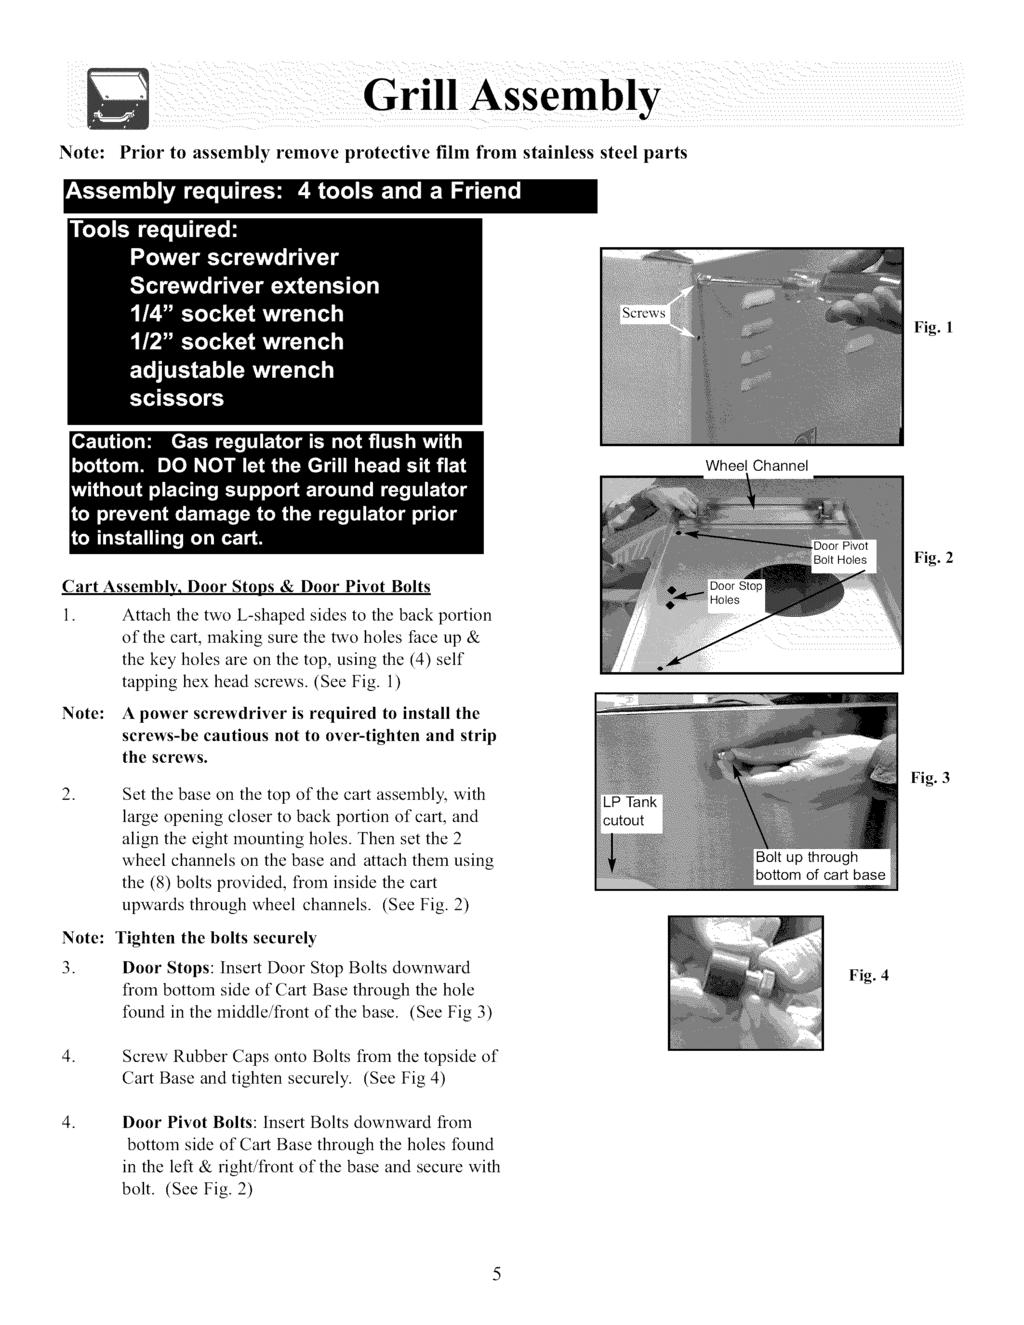 Note: Prior to assembly remove protective film from stainless steel parts Fig 1 Wheel Channel Fig 2 Cart Assembly, Door Stops & Door Pivot Bolts 1 Attach the two L-shaped sides to the back portion of